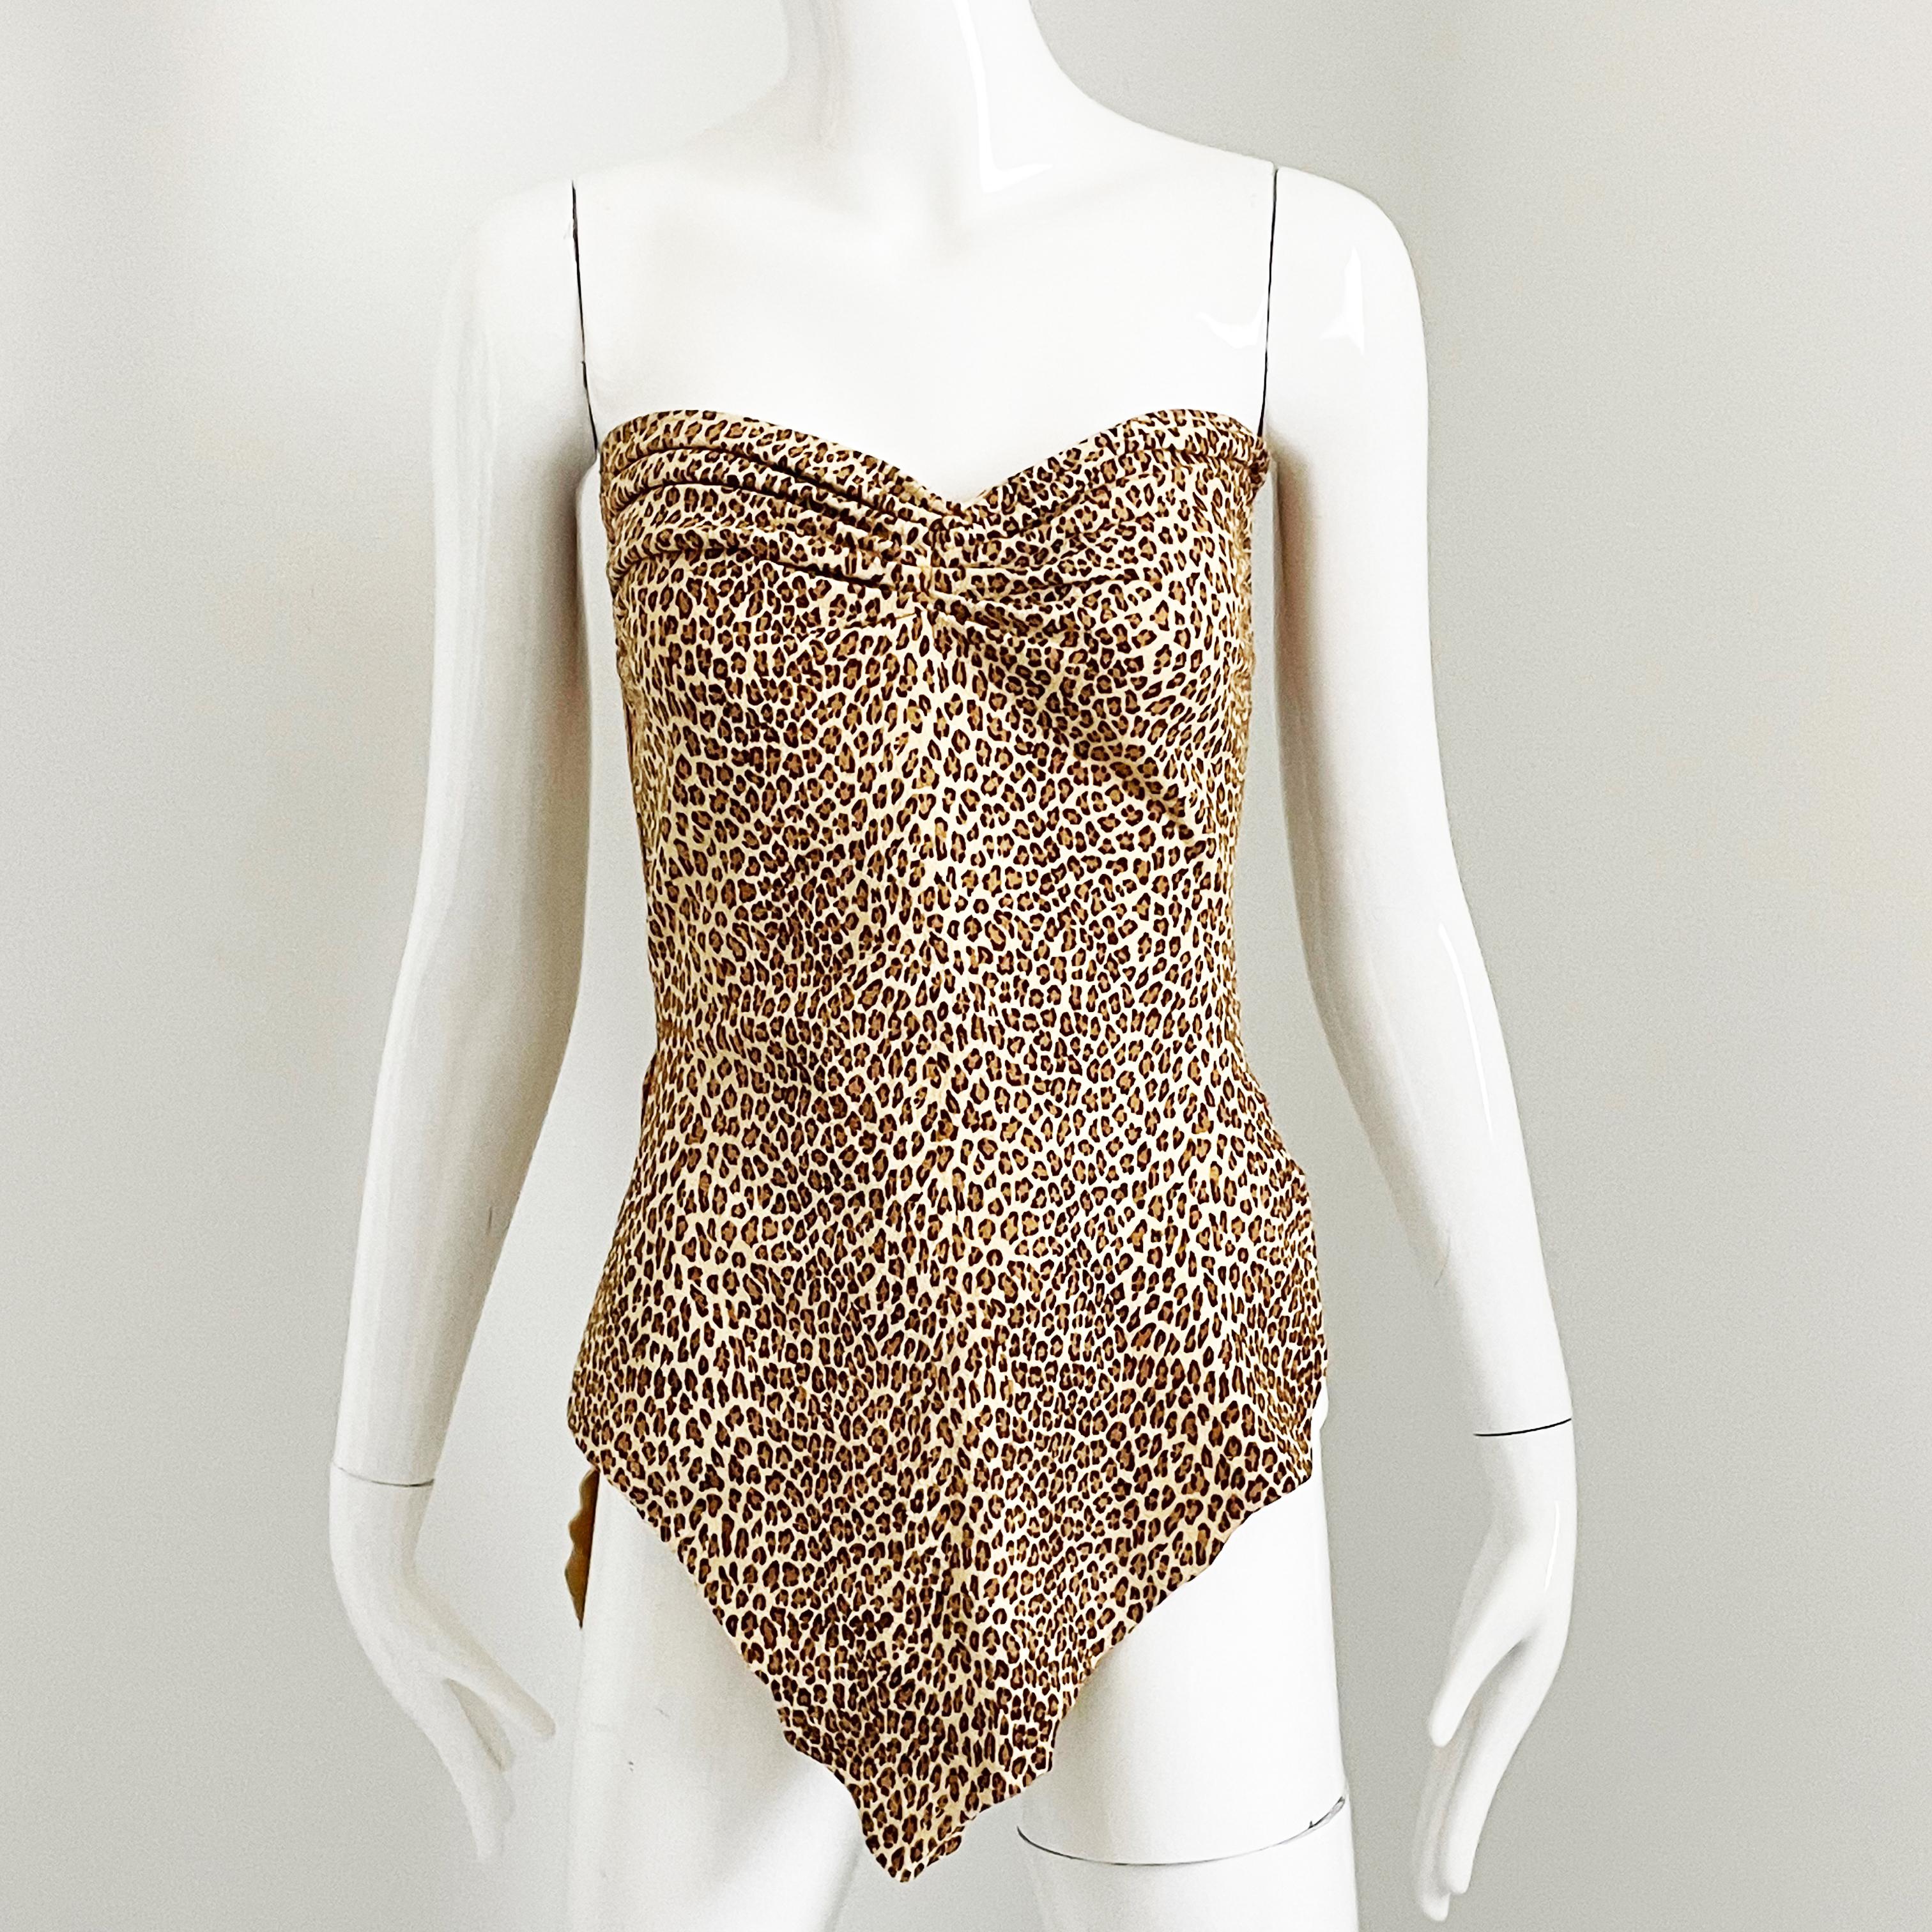 Norma Kamali OMO Leather Corset Top with Wrap Ties Leopard Print Vintage HTF For Sale 7